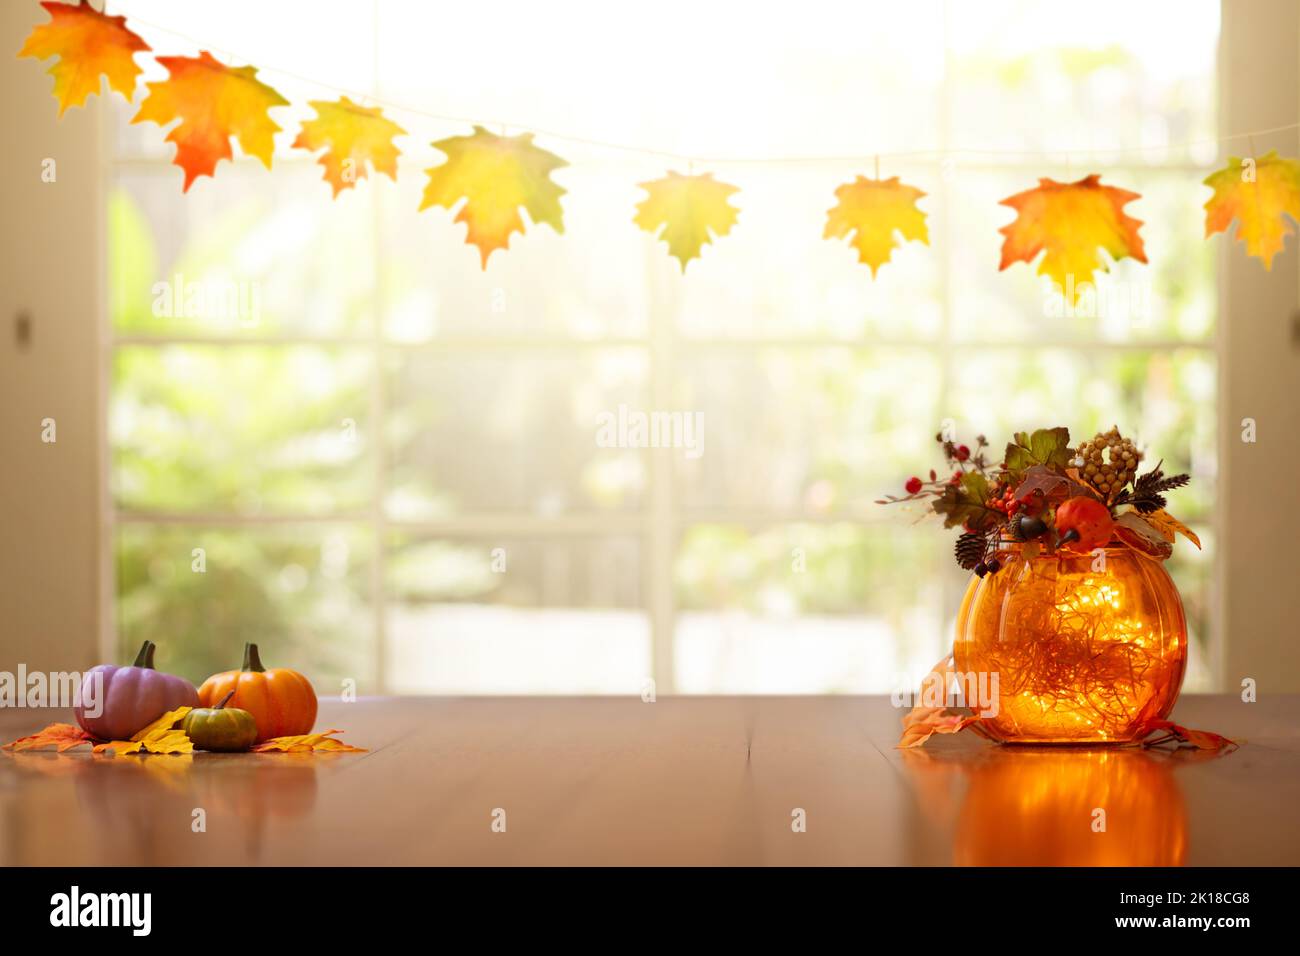 Autumn home decoration. Pumpkin lantern for Thanksgiving table setting. Orange leaves and flowers arrangement in living room. Fall colors in house dec Stock Photo